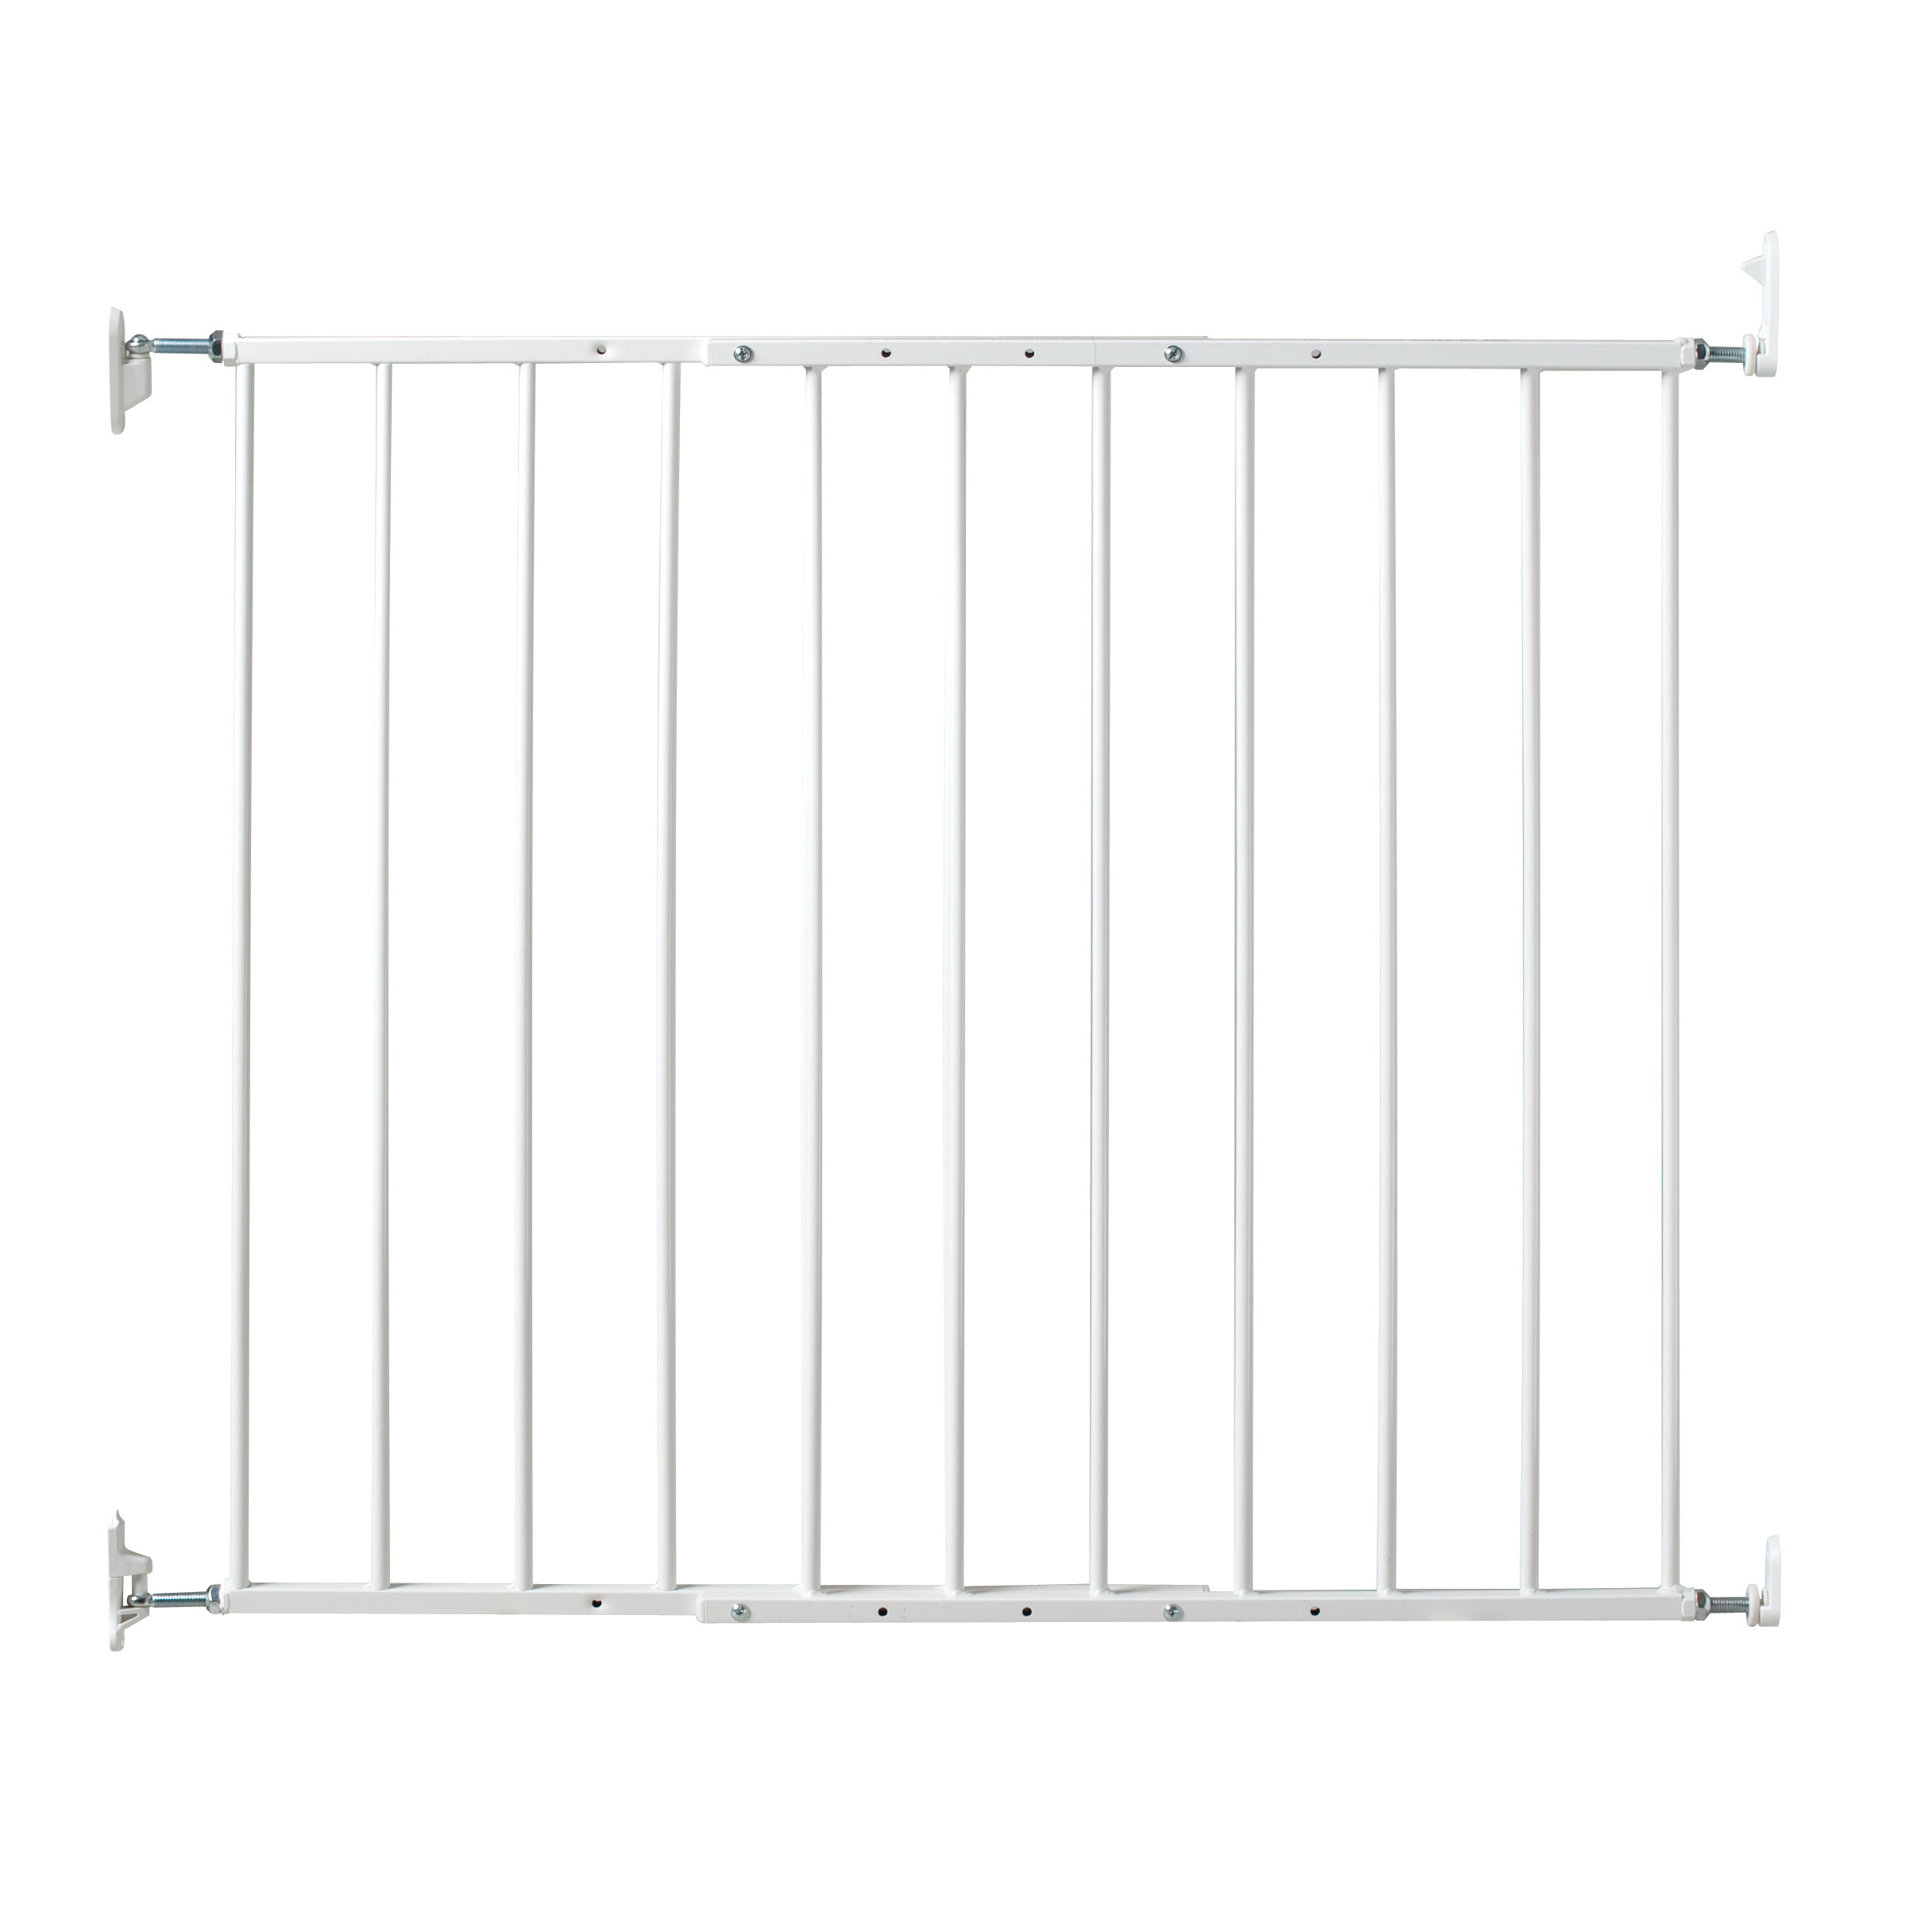 KidCo Safeway G2000 Stair Baby Safety Gate, Steel, White, 33-1/2 in H Dimensions - 1